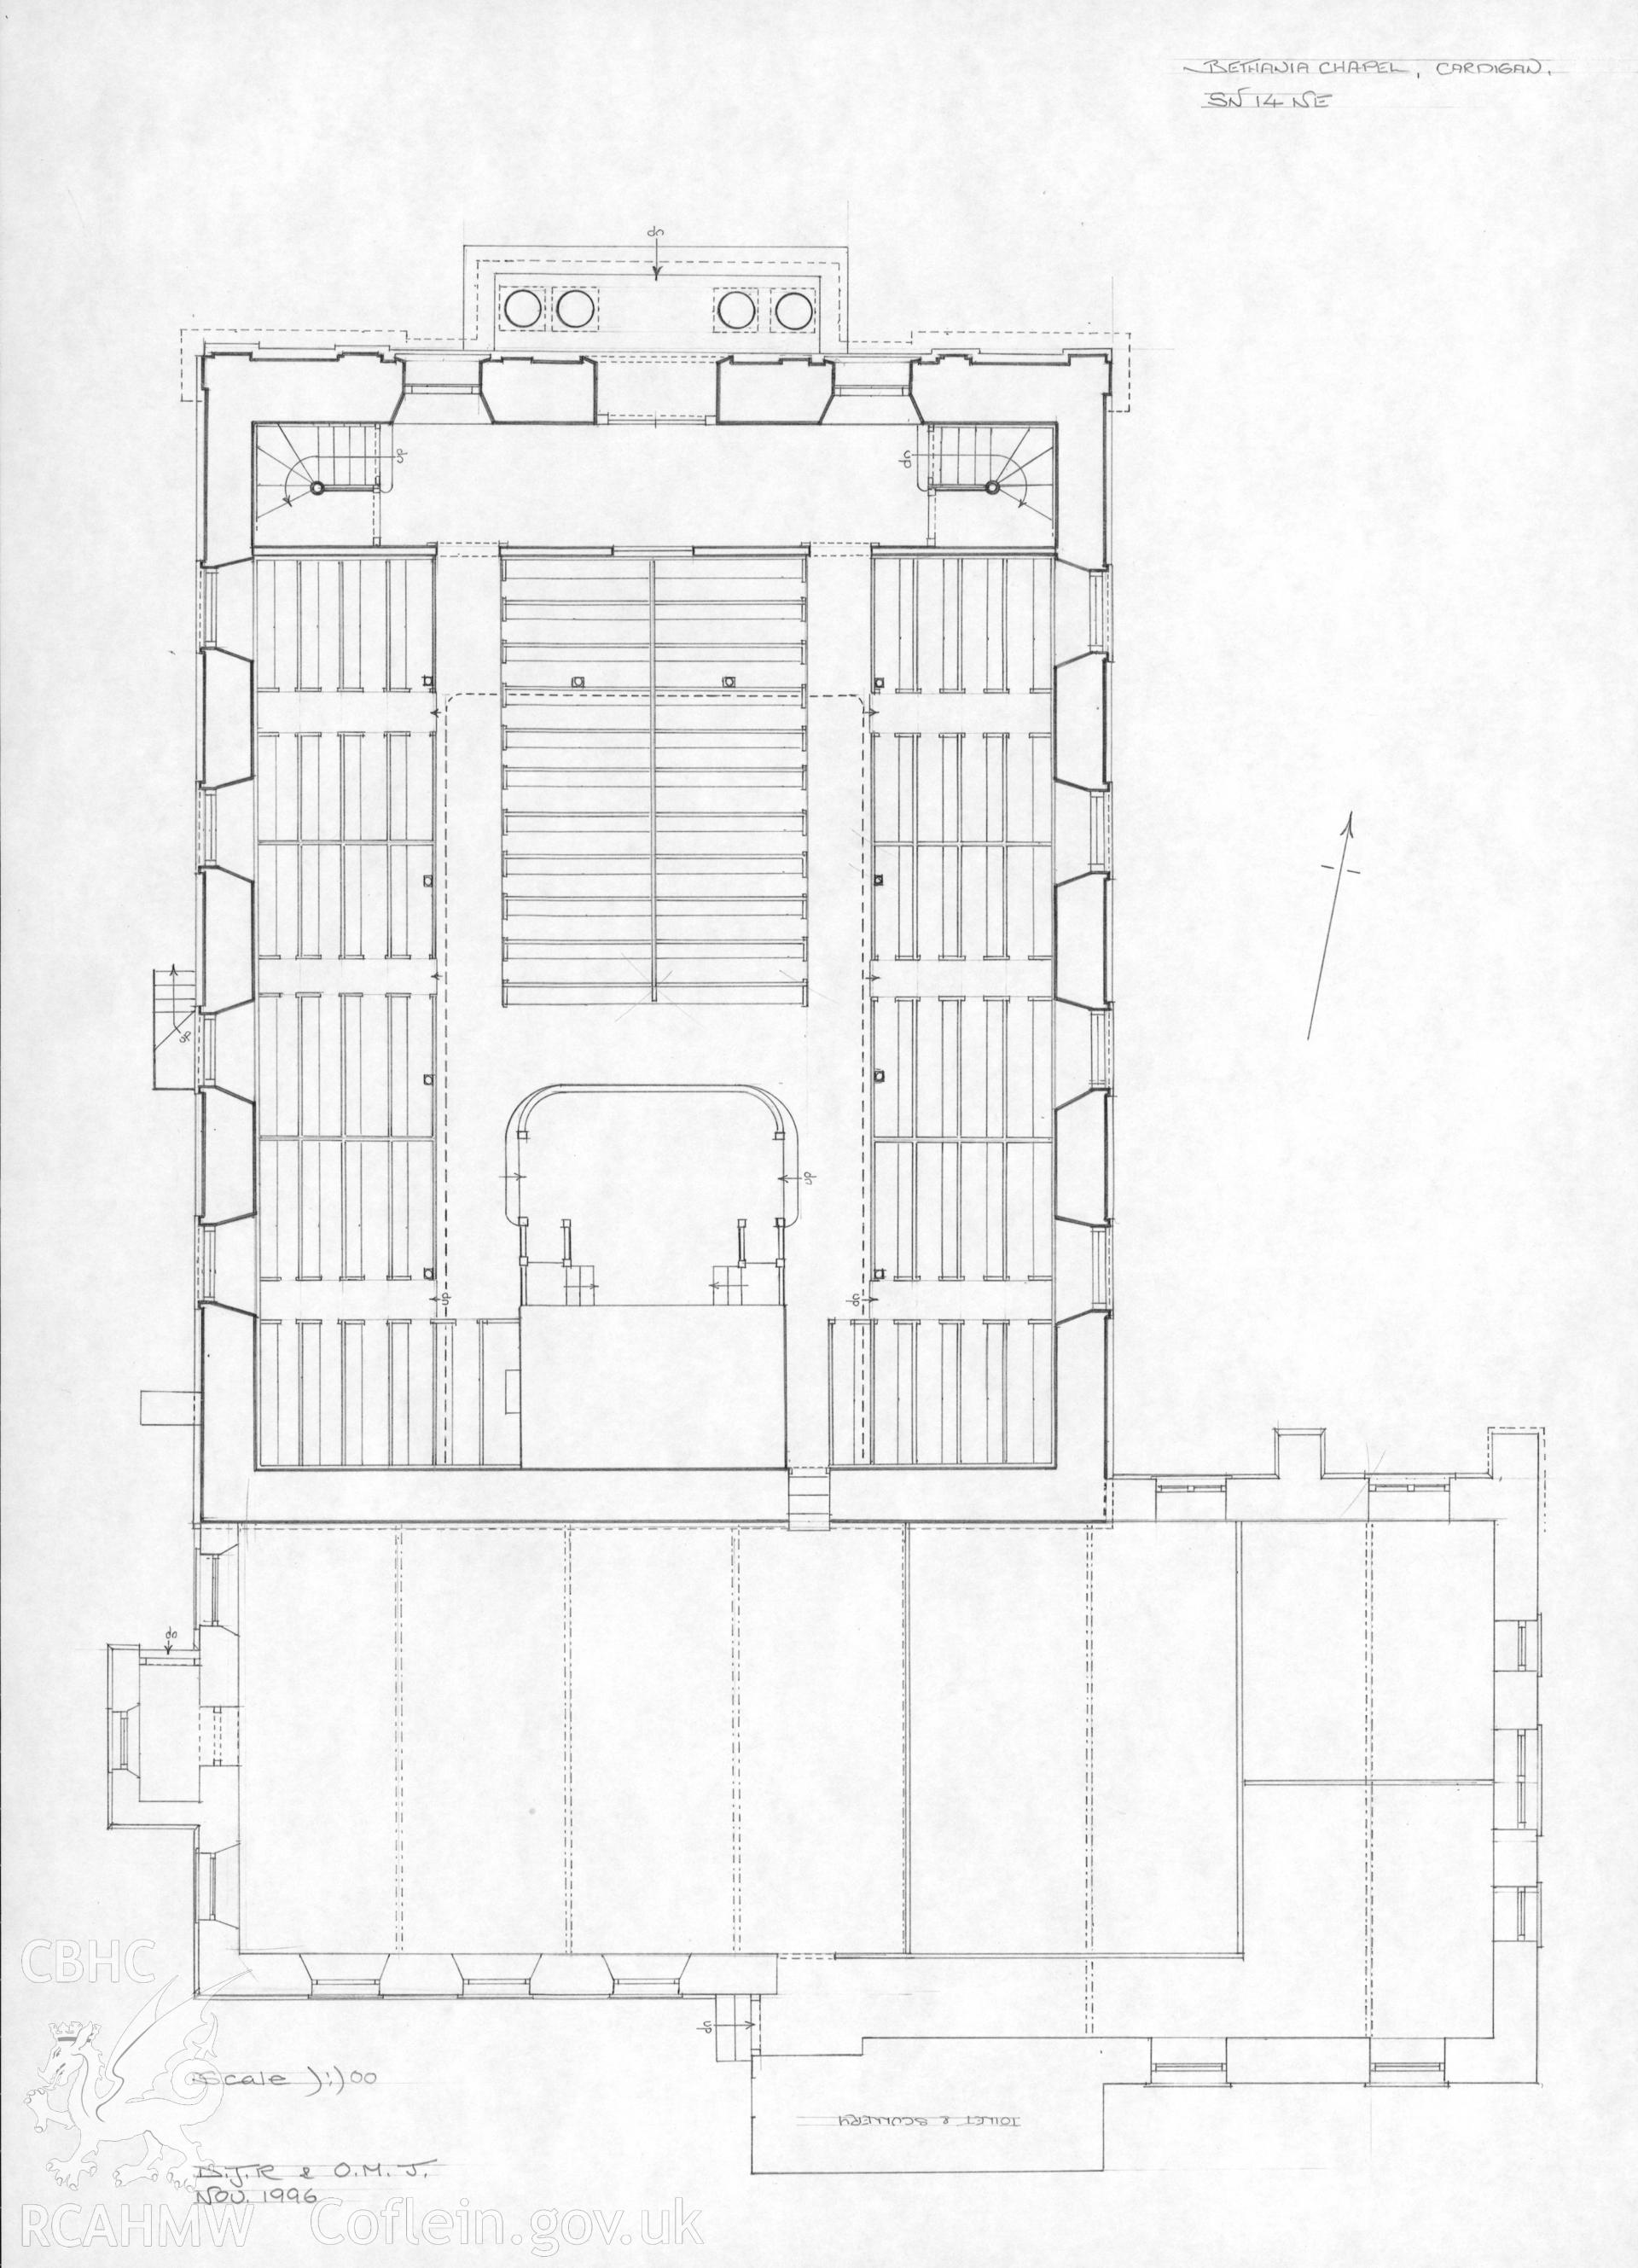 Bethania Chapel, Cardigan; Scale plan by D.J. Roberts & O.M. Jenkins dated November 1996.